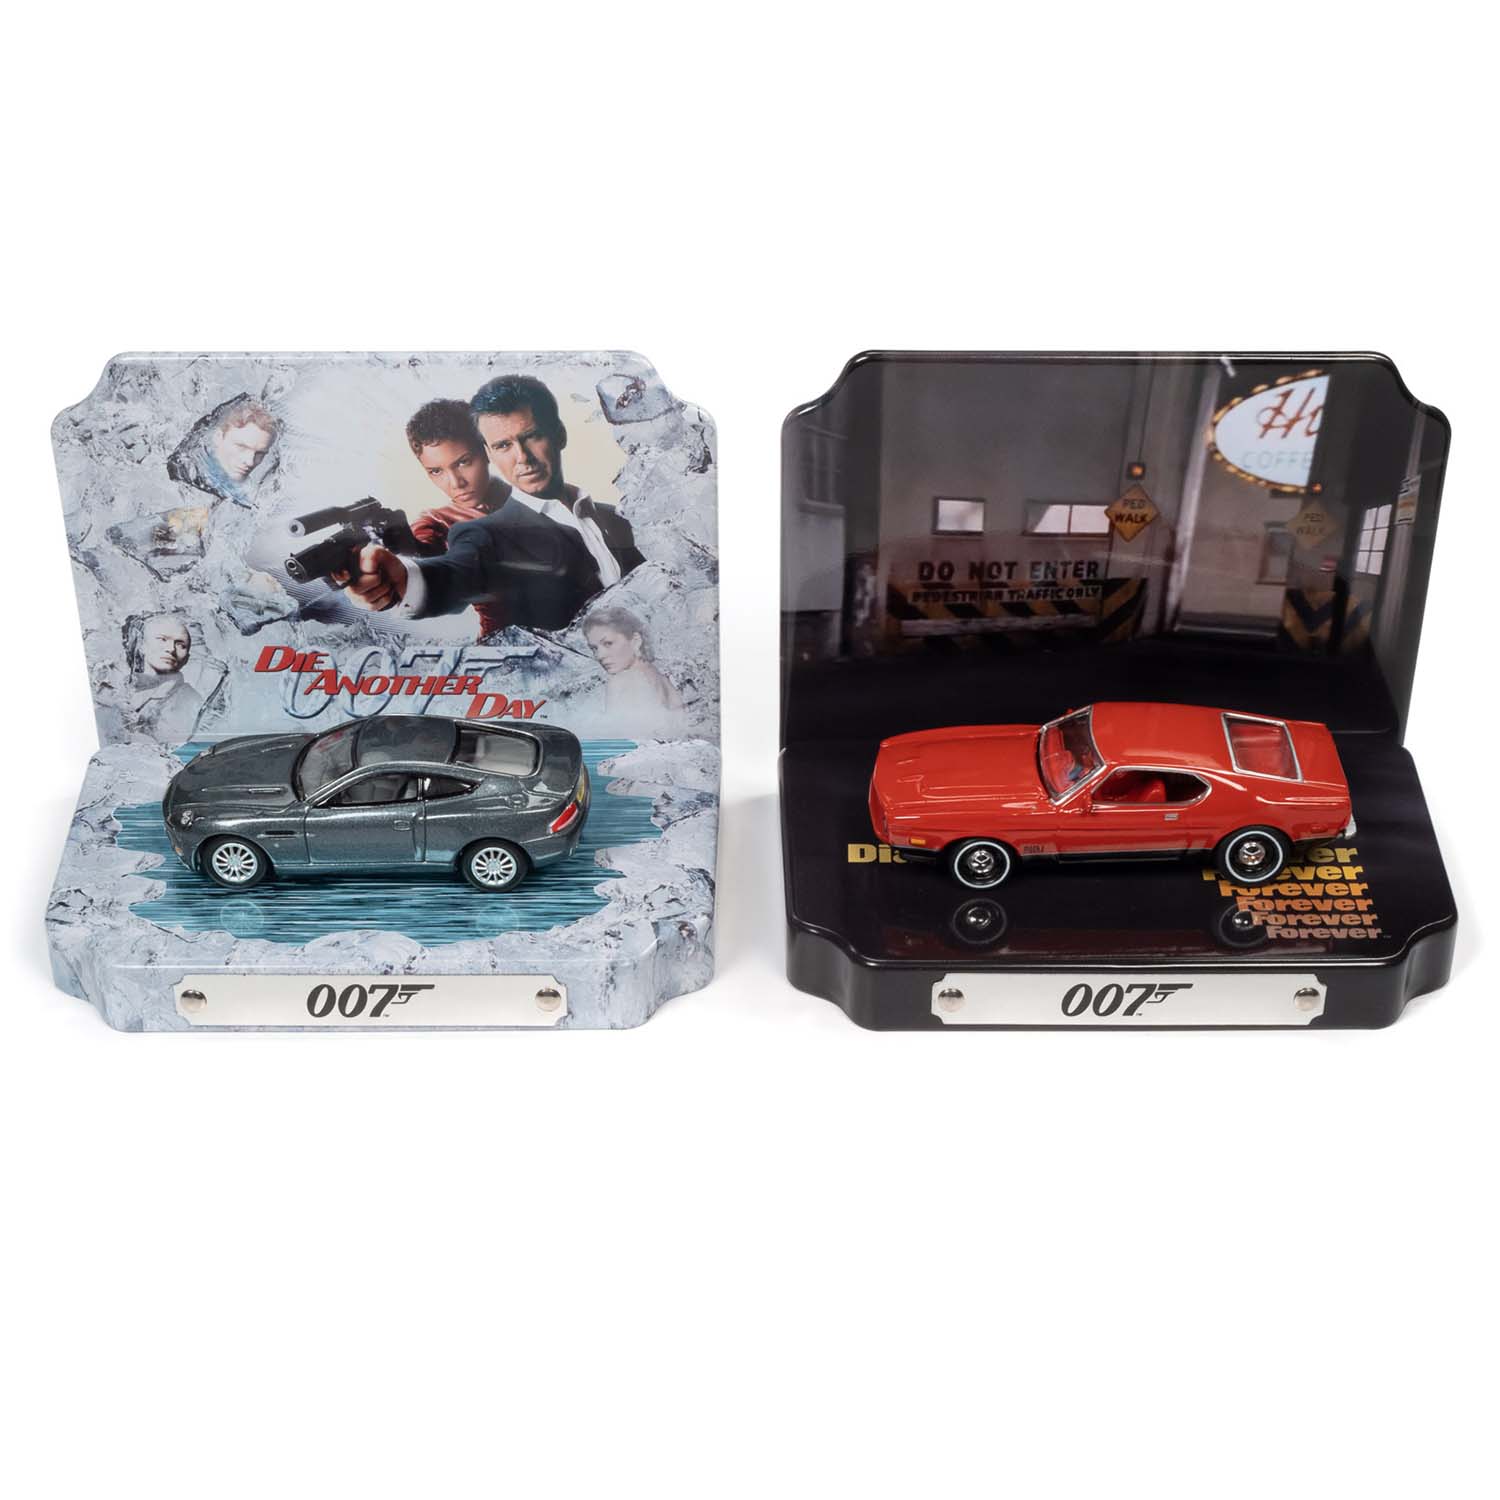 James Bond Mustang & Vanquish Two Car Set - By Johnny Lightning (Pre-order) ROUND2 